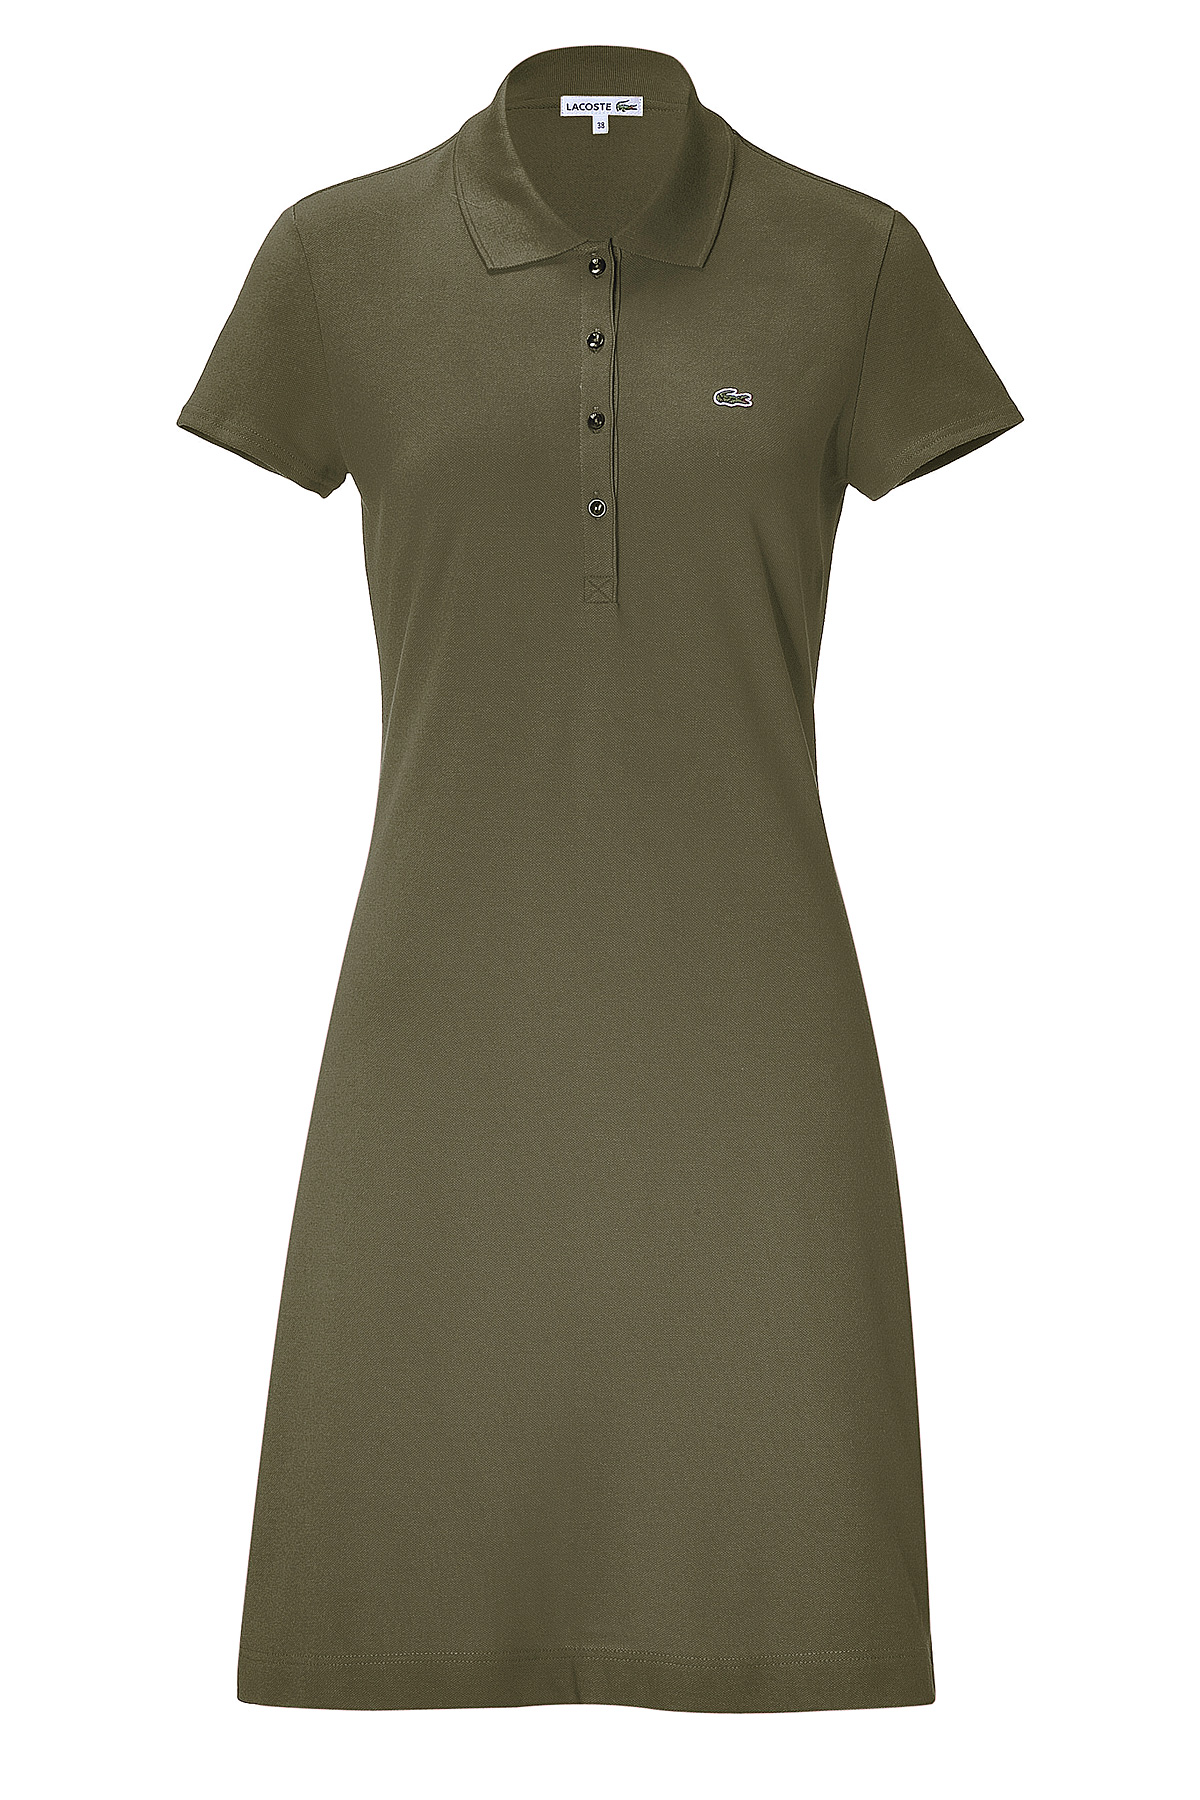 Lyst - Lacoste Olive Classic Ss Polo Dress in Green